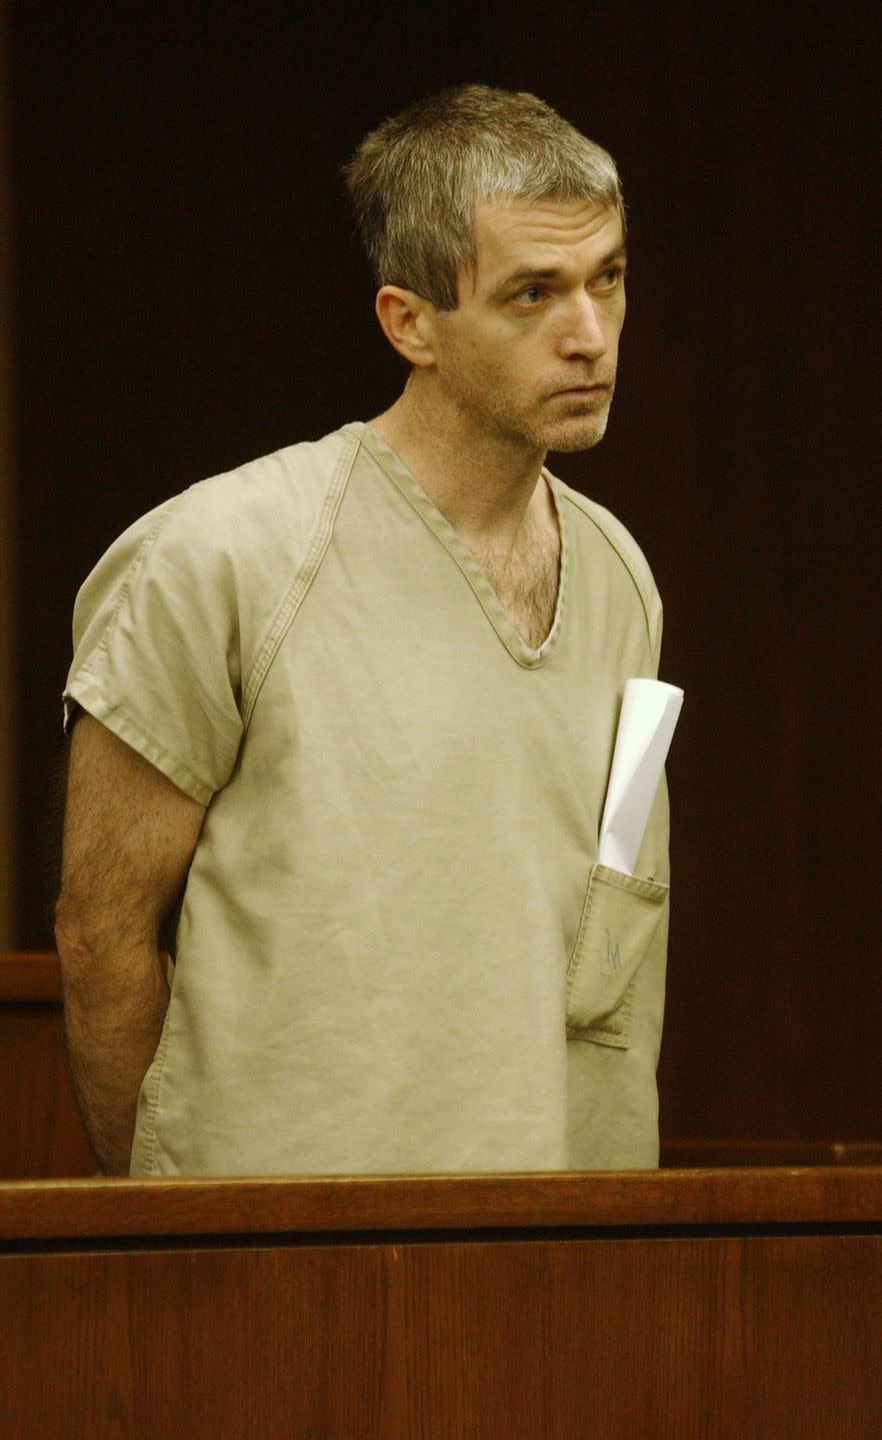 somerville, nj   december 15  charles cullen, 43, from bethlehem, pennslyvania, is seen in a courtroom december 15, 2003 in somerville, new jersey cullen has admitted to killing 40 terminally ill patients in nine hospitals and a nursing home in the past 16 years  photo by john wheelergetty images